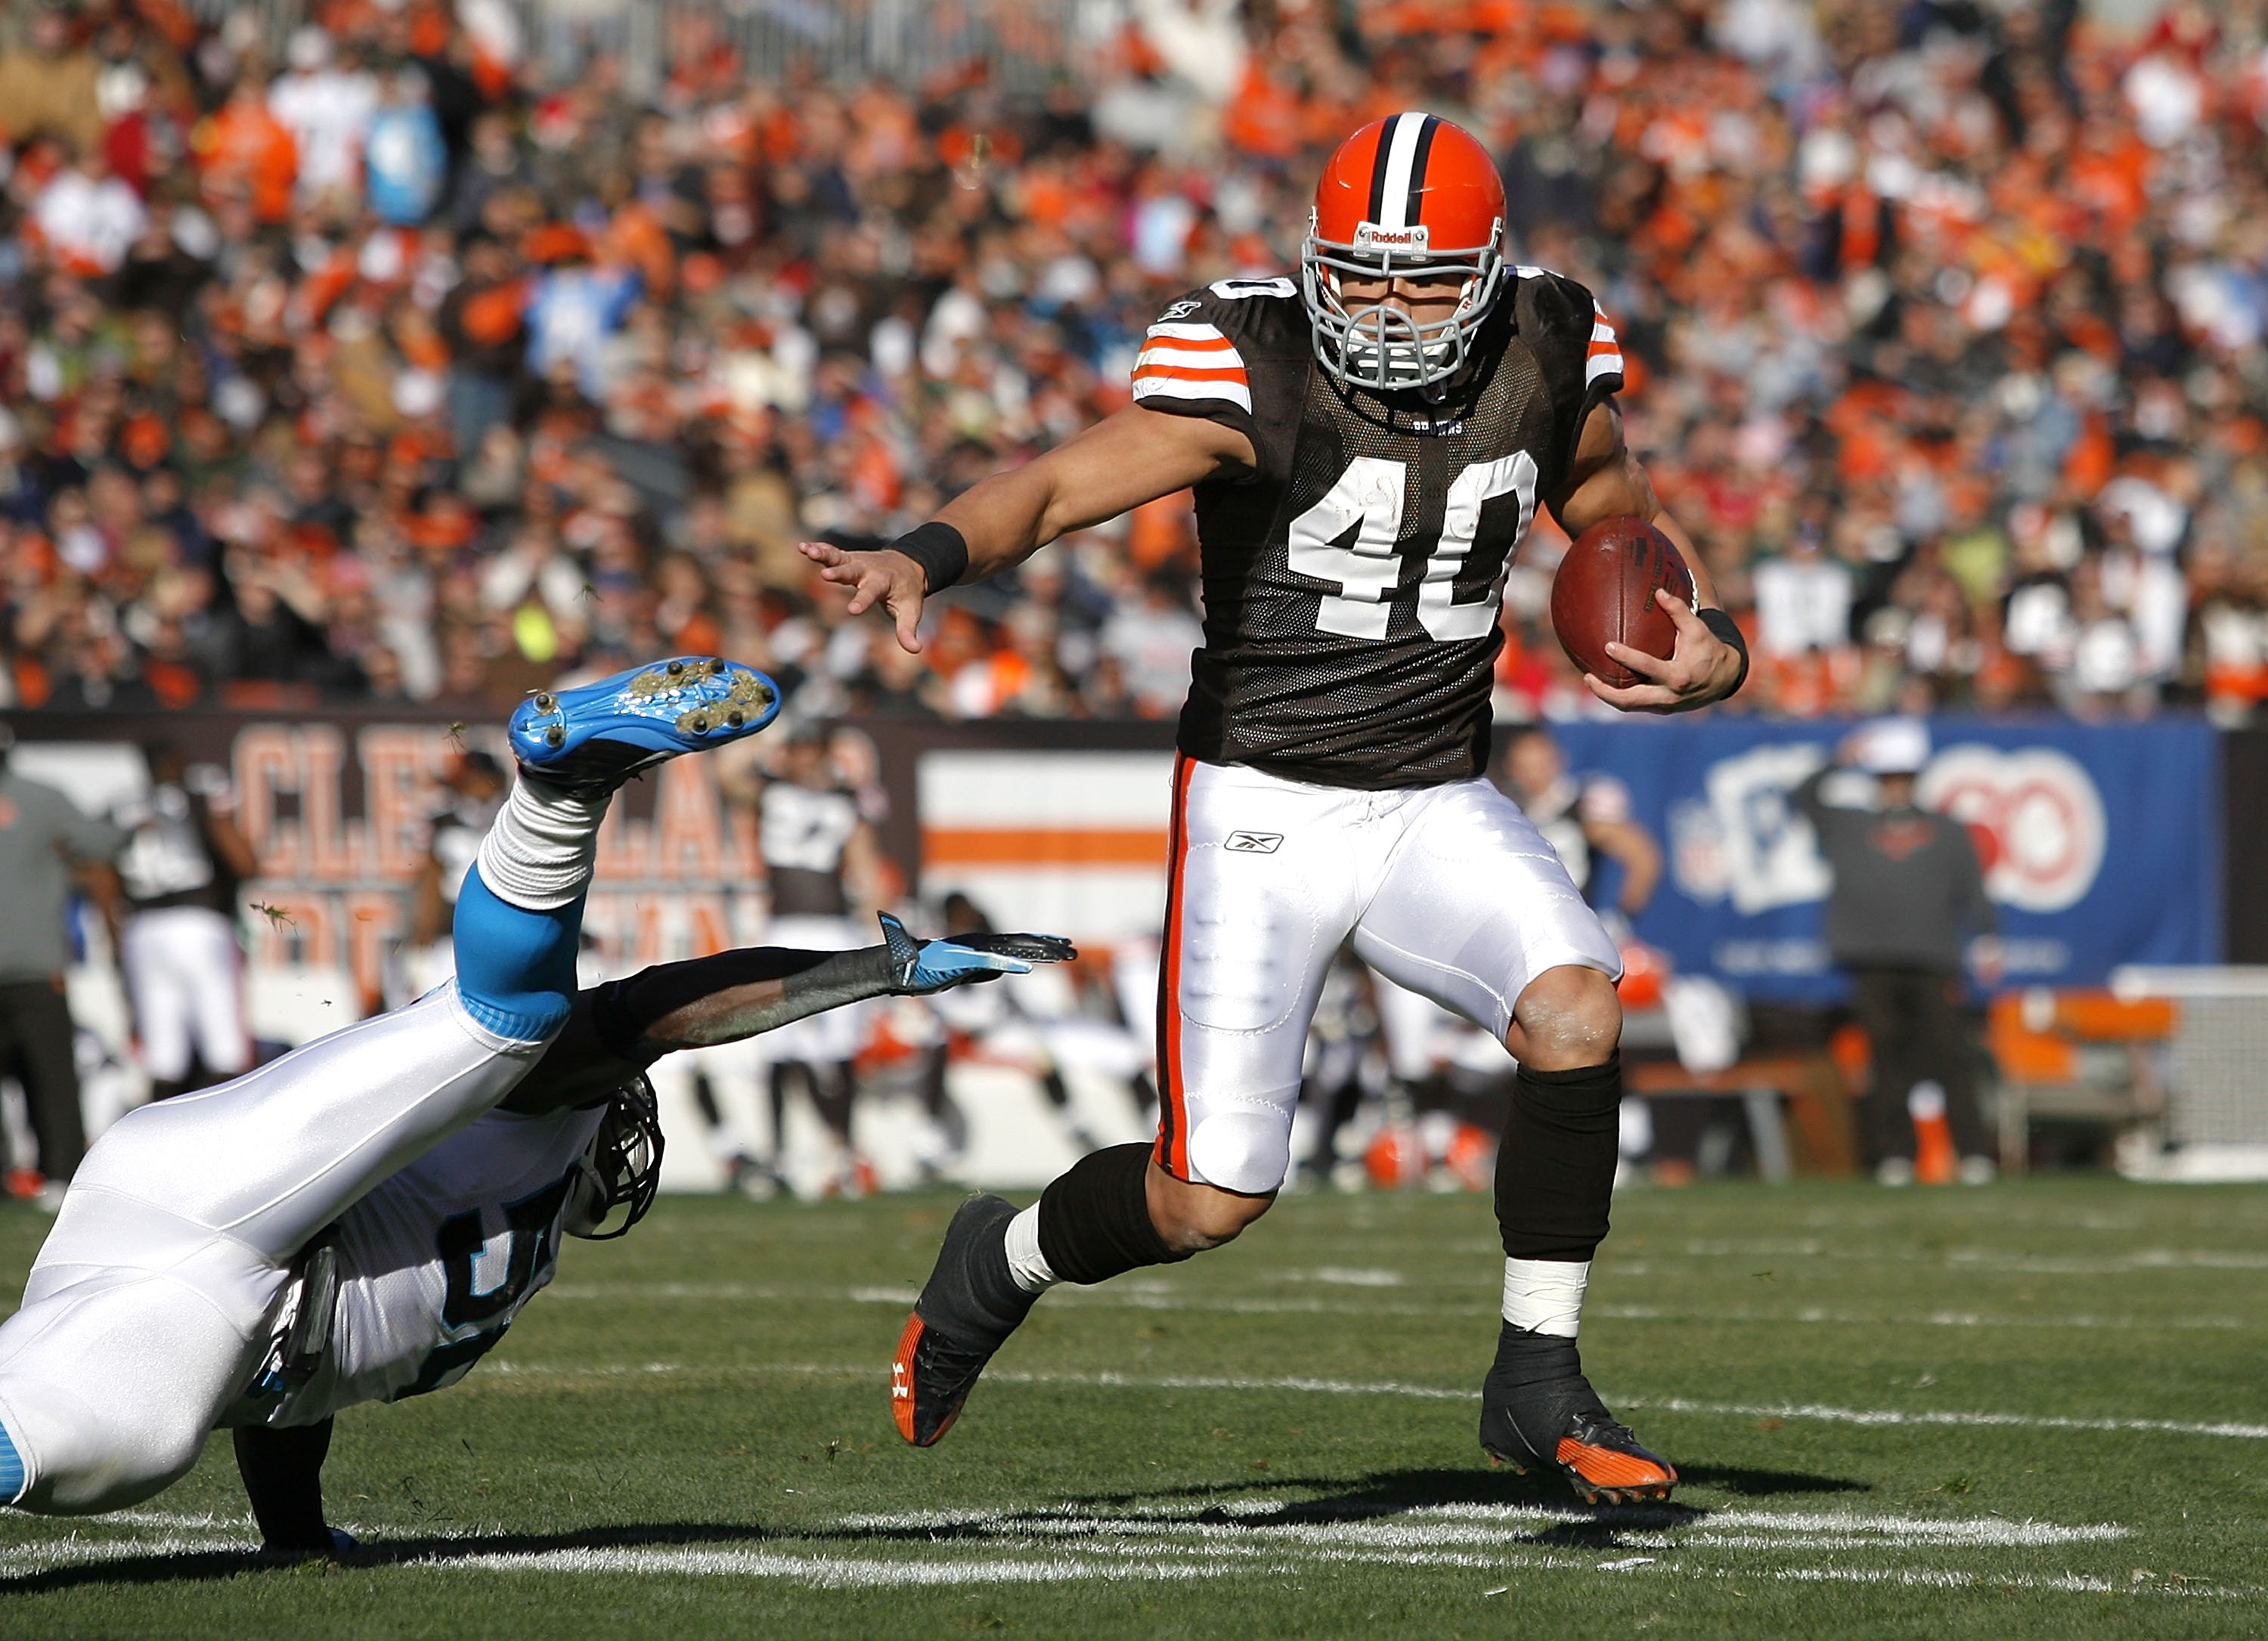 Buffalo Bills vs. Browns: Preview and Key Matchups To | Bleacher Report | Latest News, Videos and Highlights